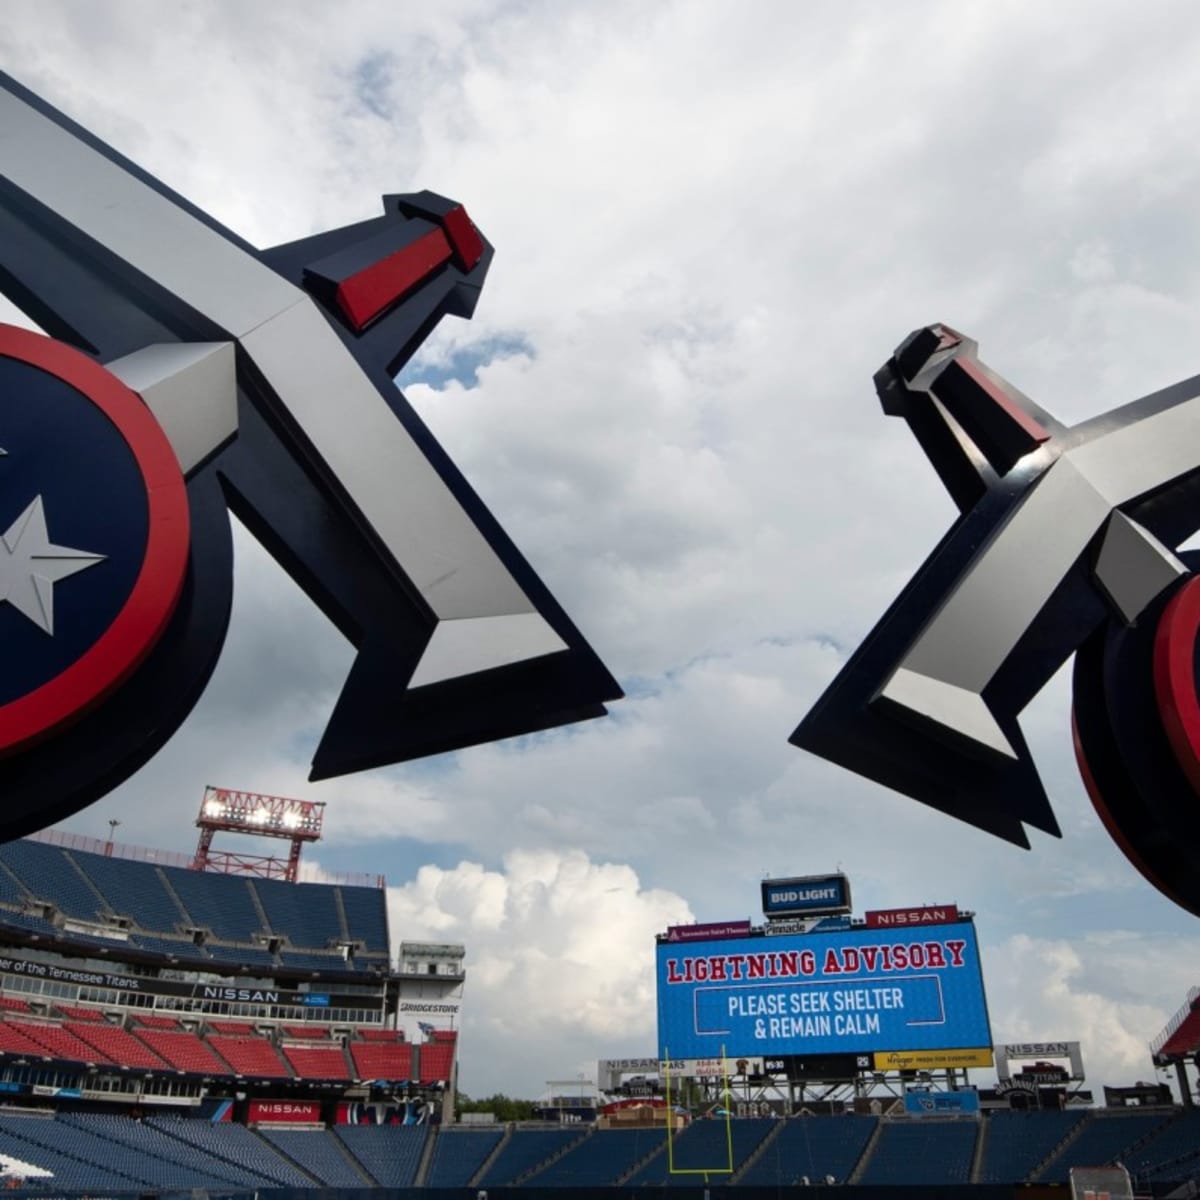 Tennessee Titans Joint Practices, Preseason Games schedule - Clarksville  Online - Clarksville News, Sports, Events and Information